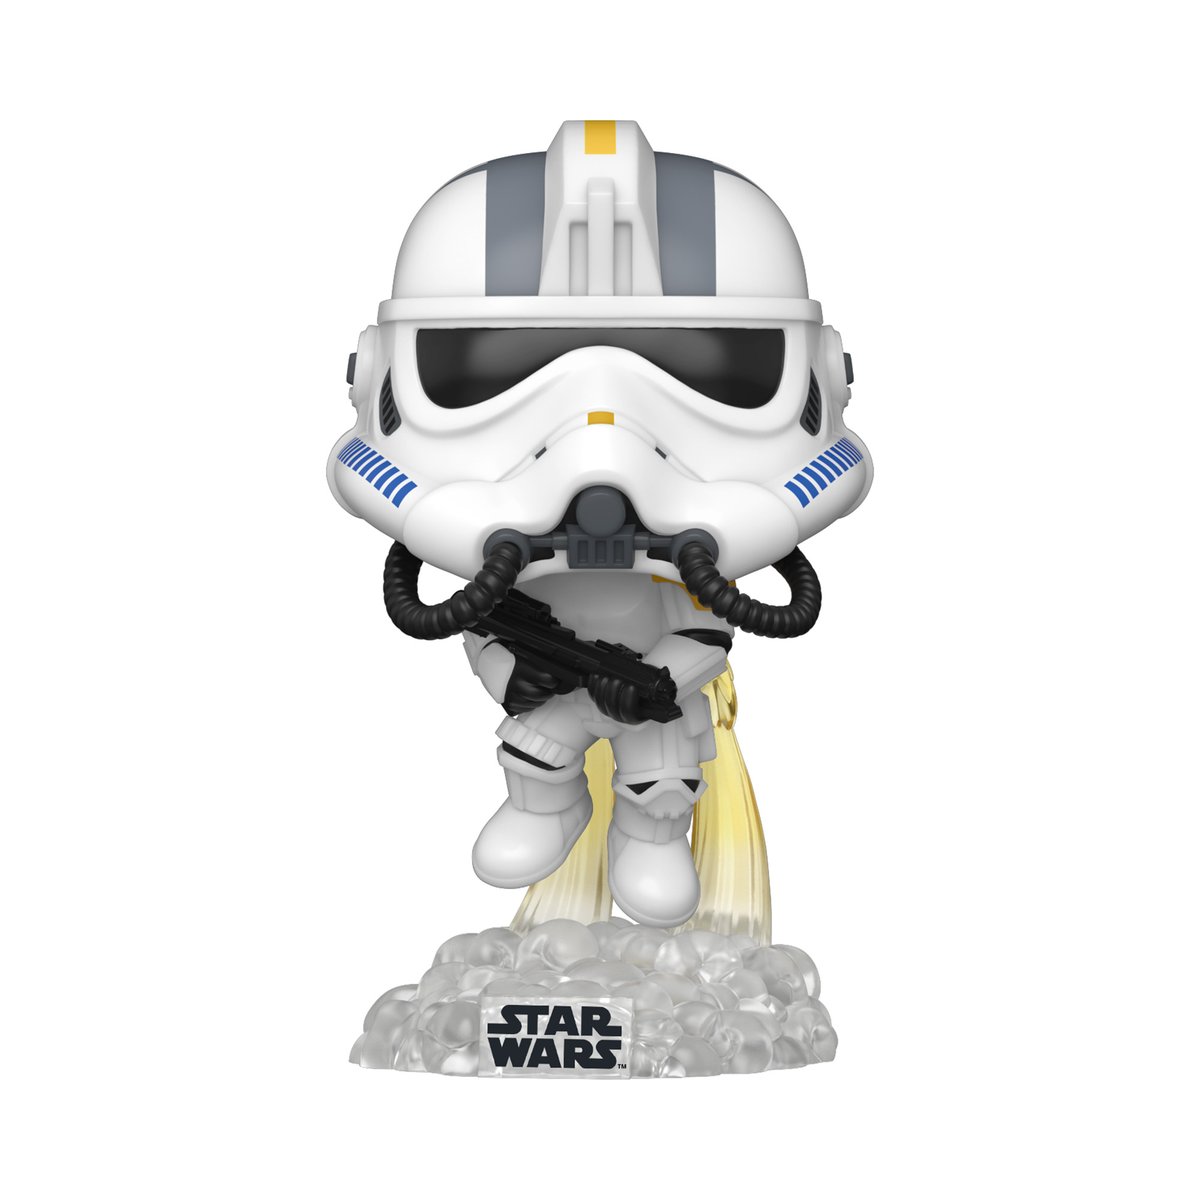 RT and follow @OriginalFunko for the chance to WIN the @GameStop exclusive Star Wars: Imperial Rocket Trooper POP! #Funko #FunkoPOP #Giveaway #StarWars